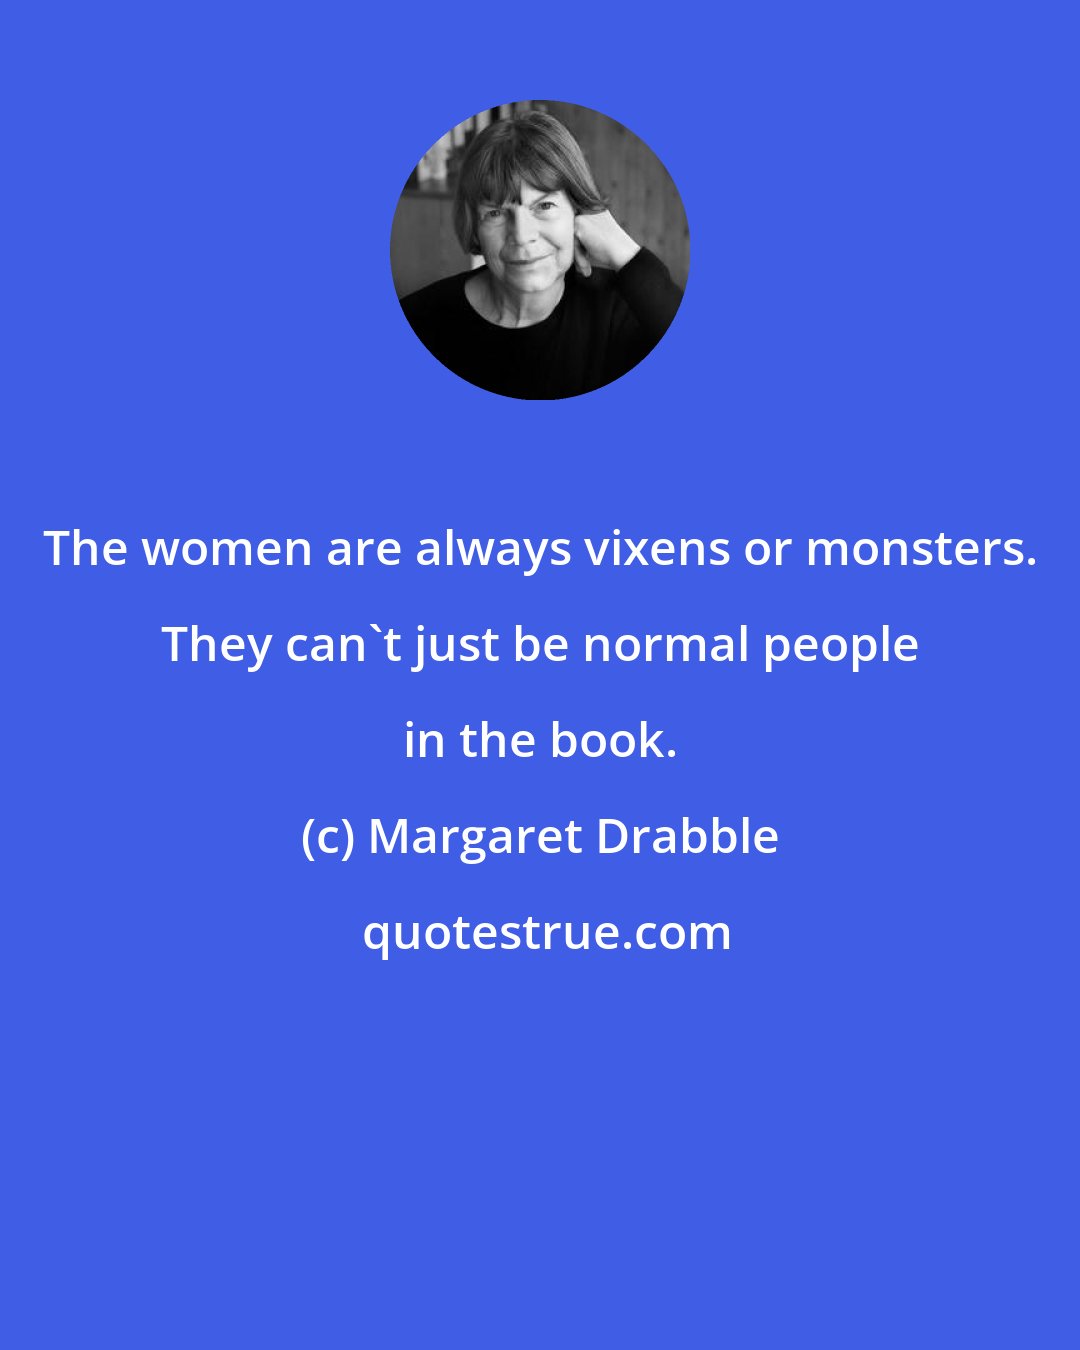 Margaret Drabble: The women are always vixens or monsters. They can't just be normal people in the book.